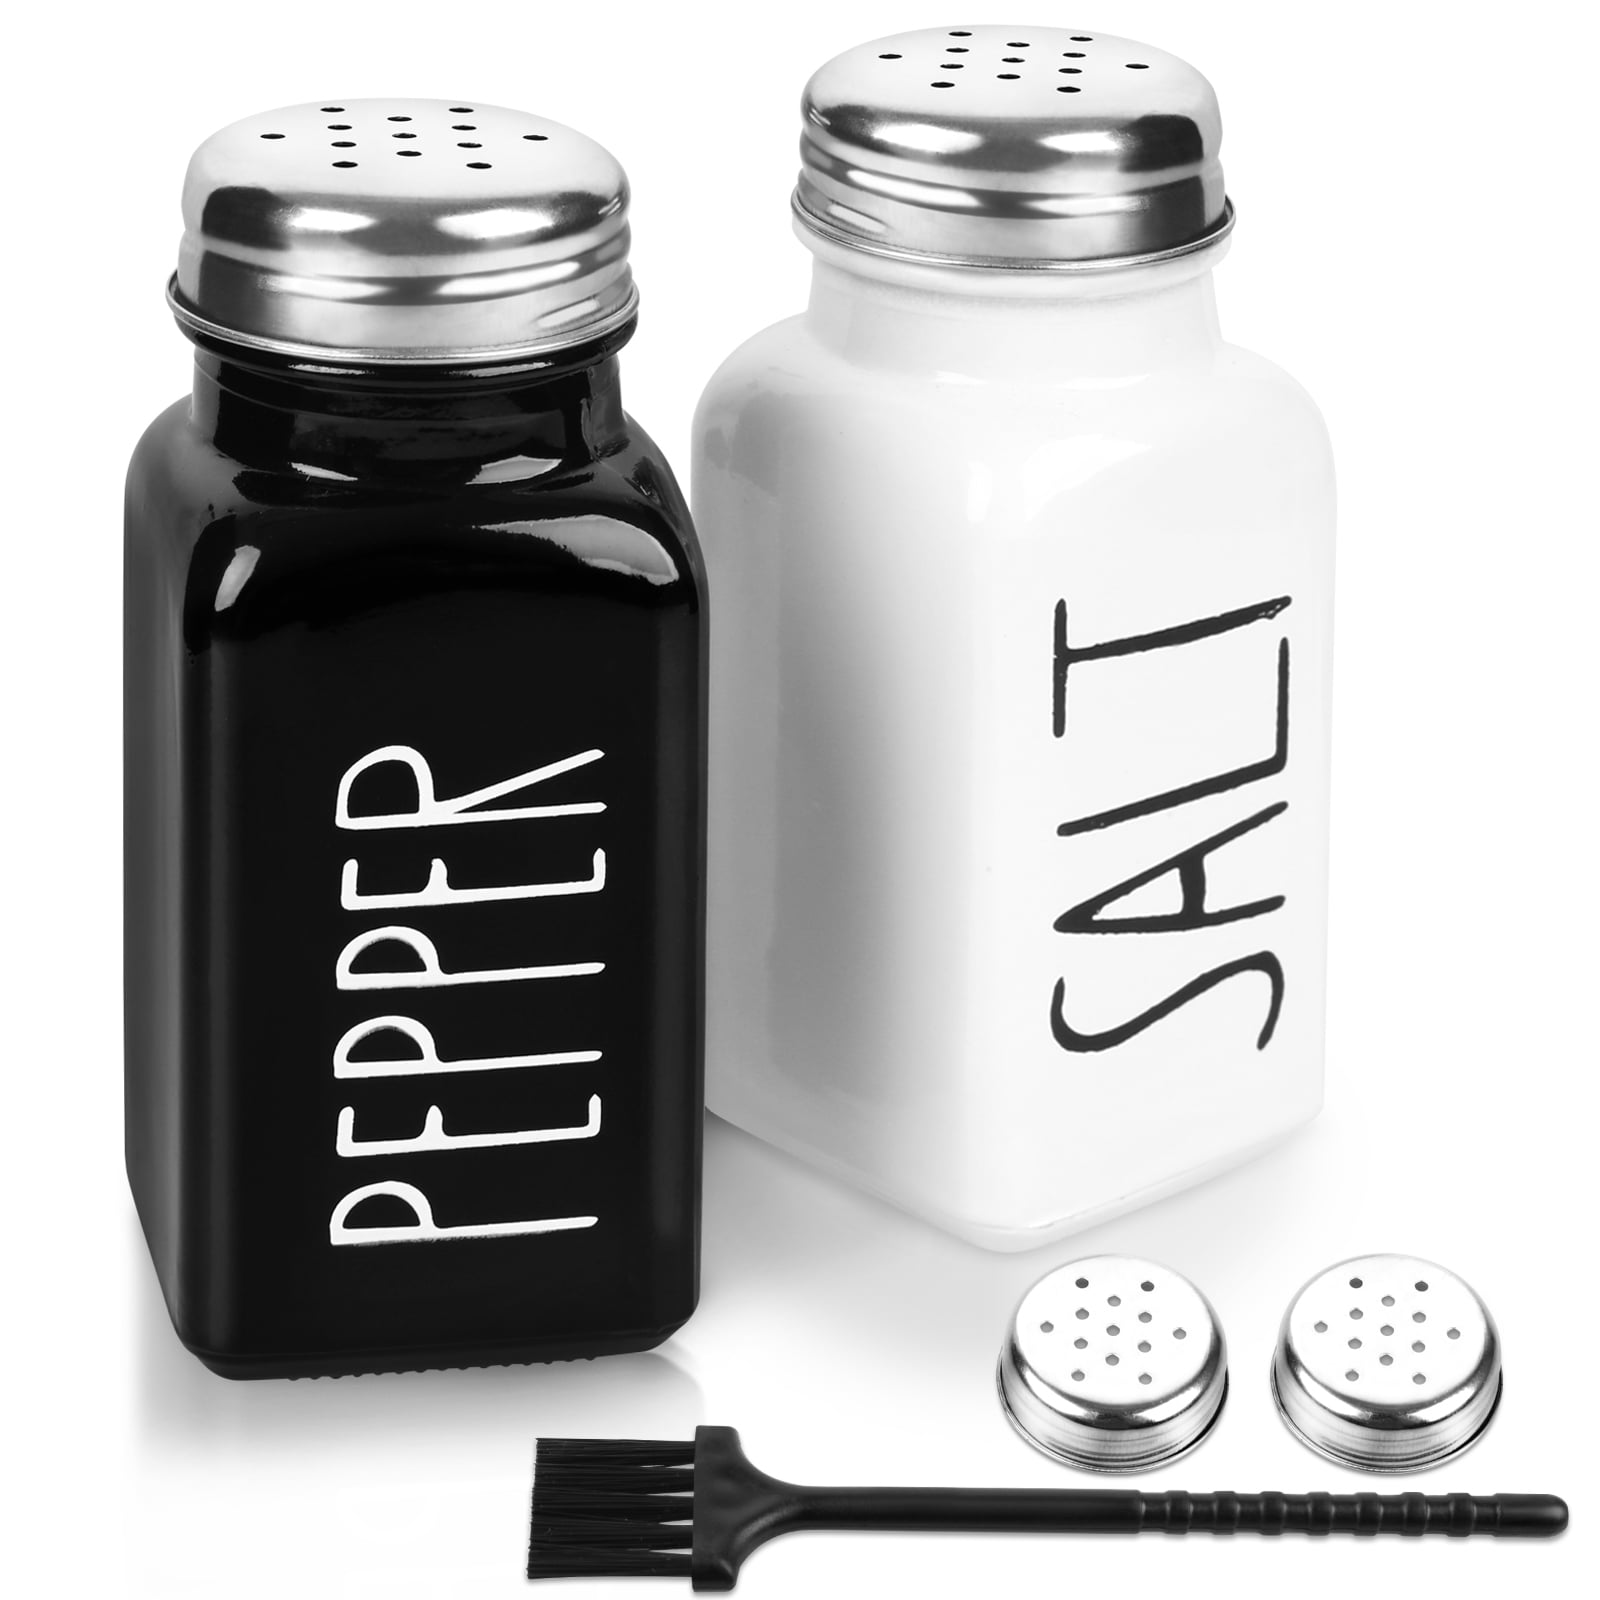 Glass Salt and Pepper Shakers Set Large,DWTS DANWEITESI Farmhouse Salt and  Pepper Shakers Cute with Stainless Steel Lid-Large Spice Jars,Clear to Know  When to Fill,Cute Farmhouse Kitchen - Yahoo Shopping